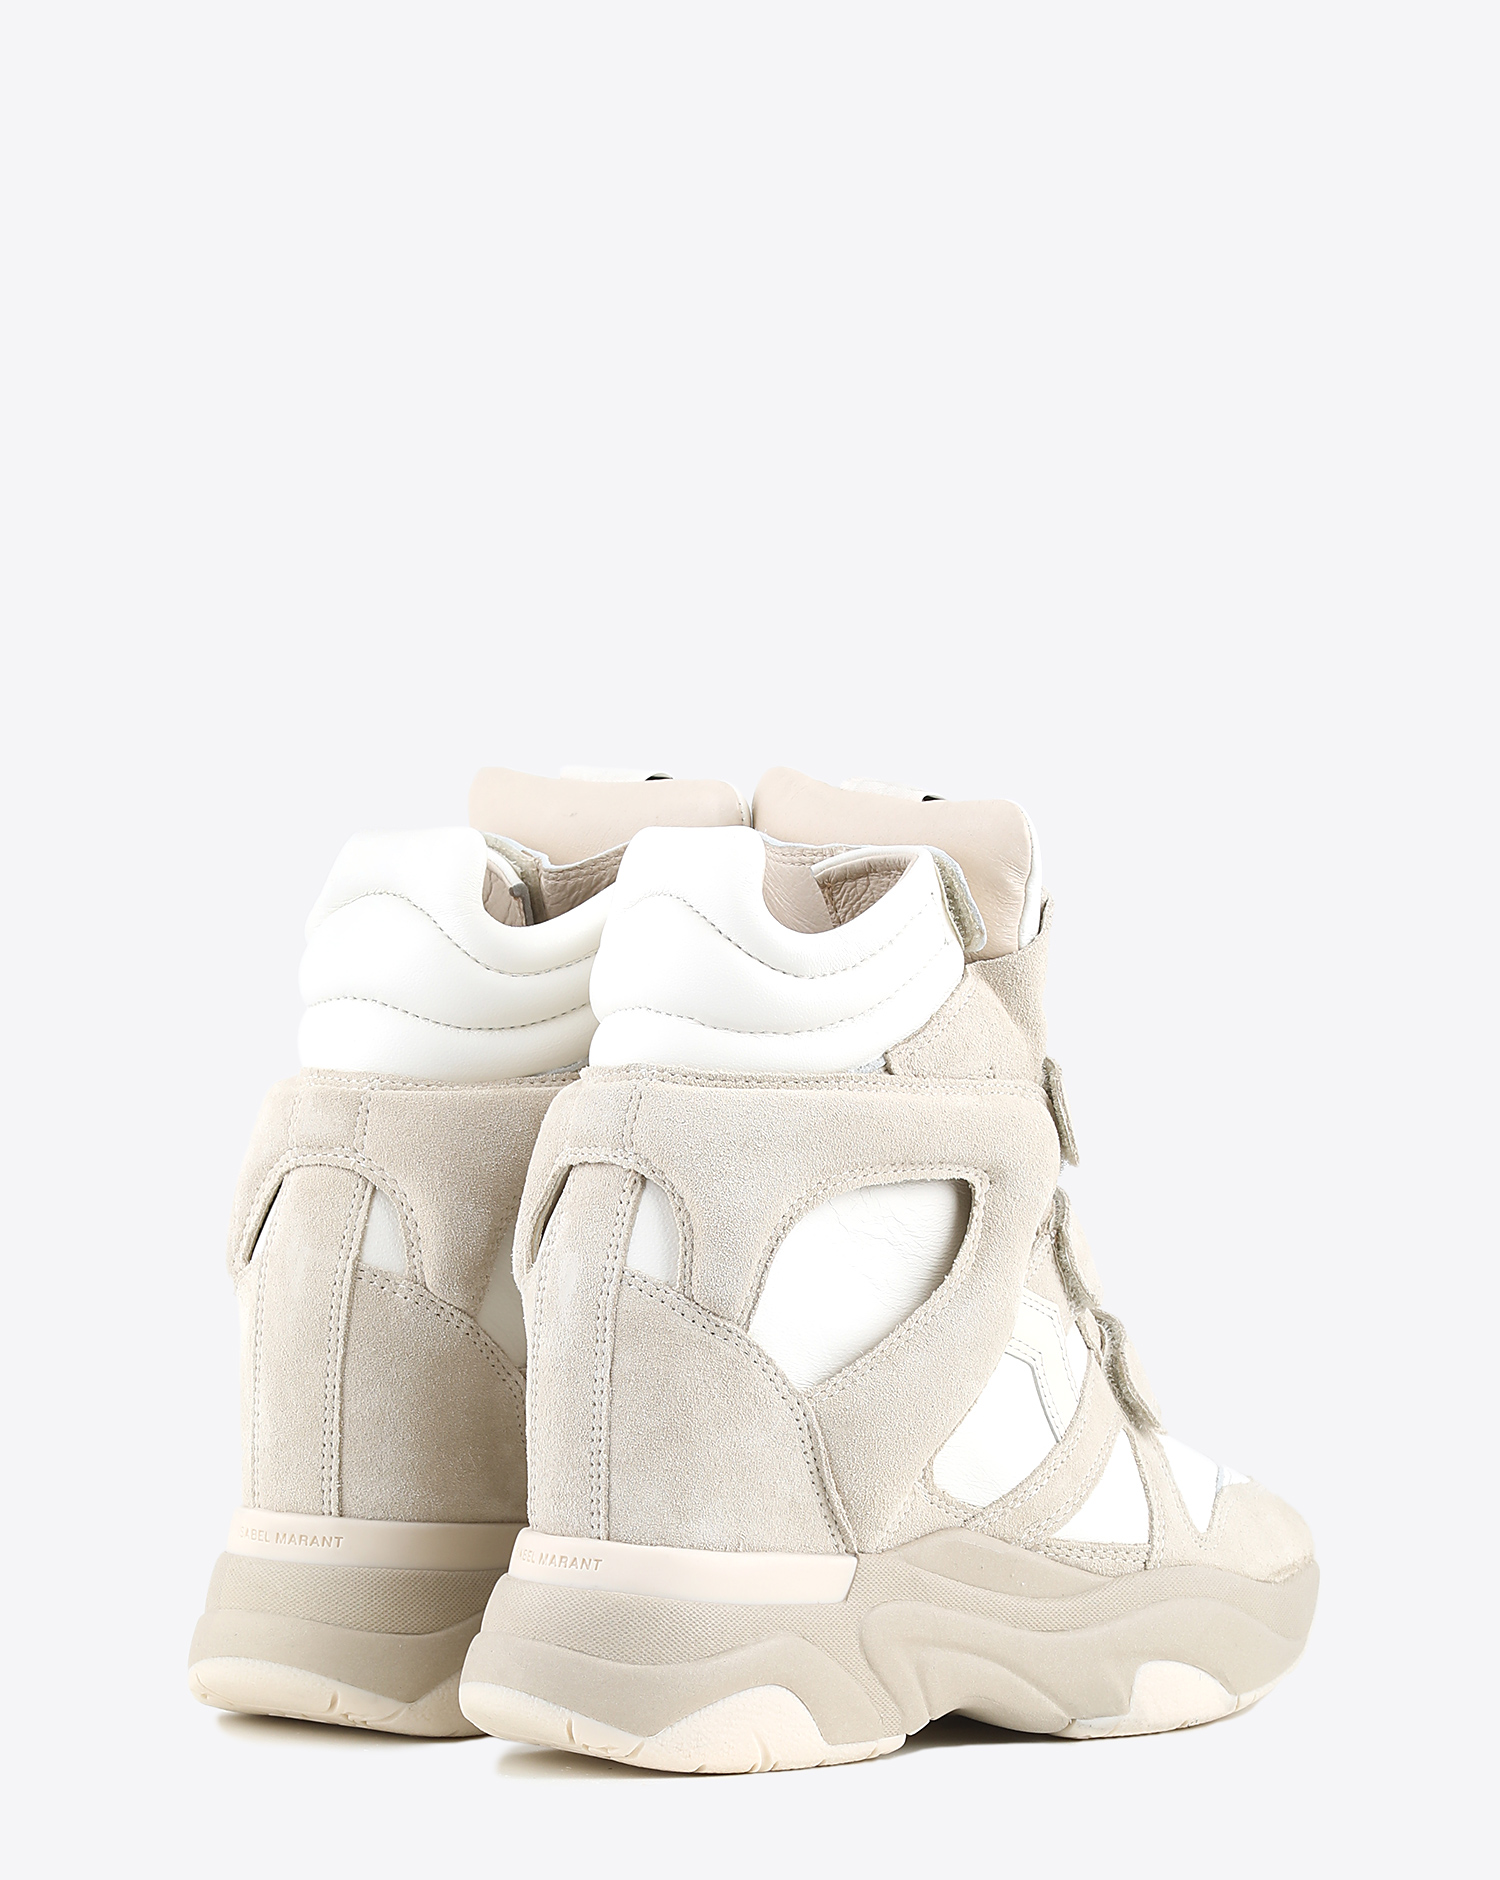 Sneakers Balskee Isabel Marant blanches. 
